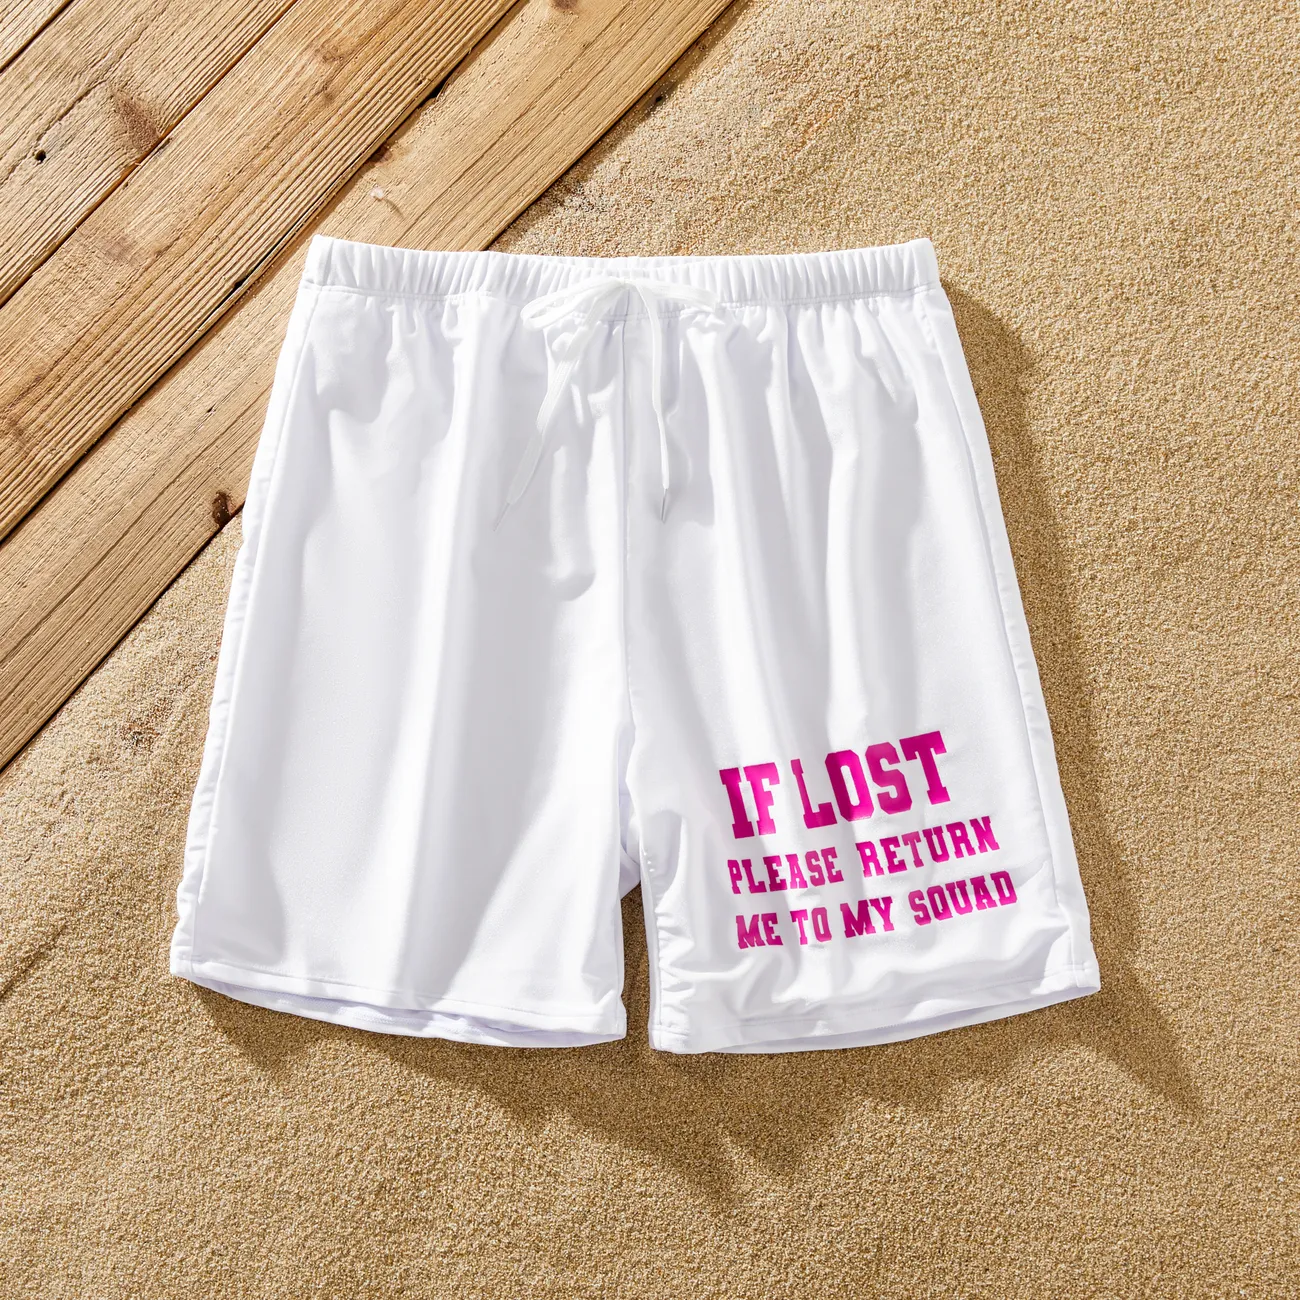 Family Matching White Drawstring Swim Trunks or Sparkling Hot Pink One-Piece Swimsuit Hot Pink big image 1